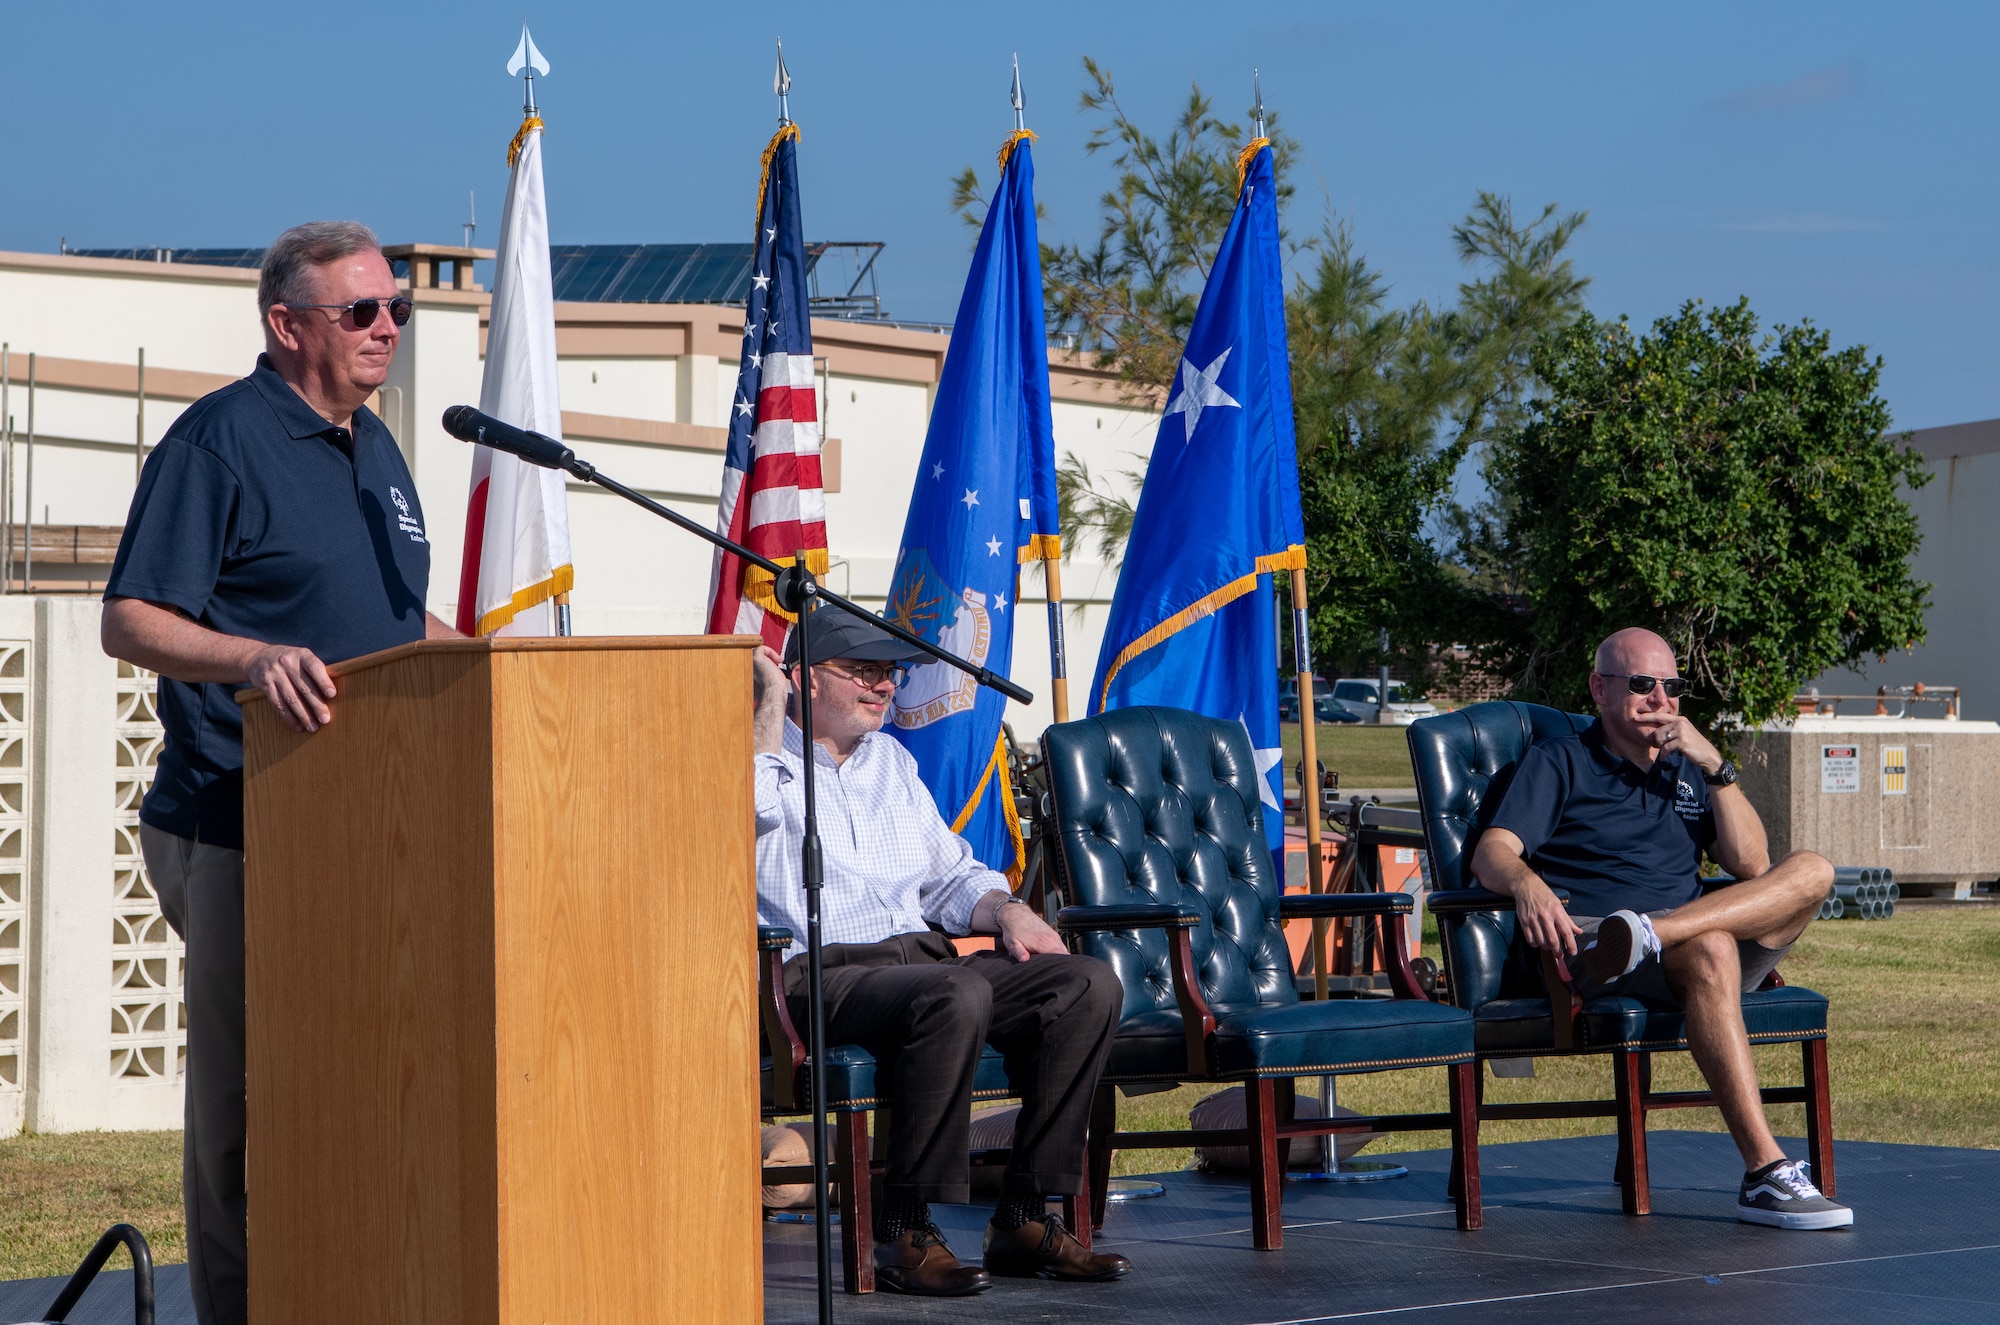 U.S. Air Force Lt. Gen. Ricky Rupp, recites the athlete's oath at a podium,